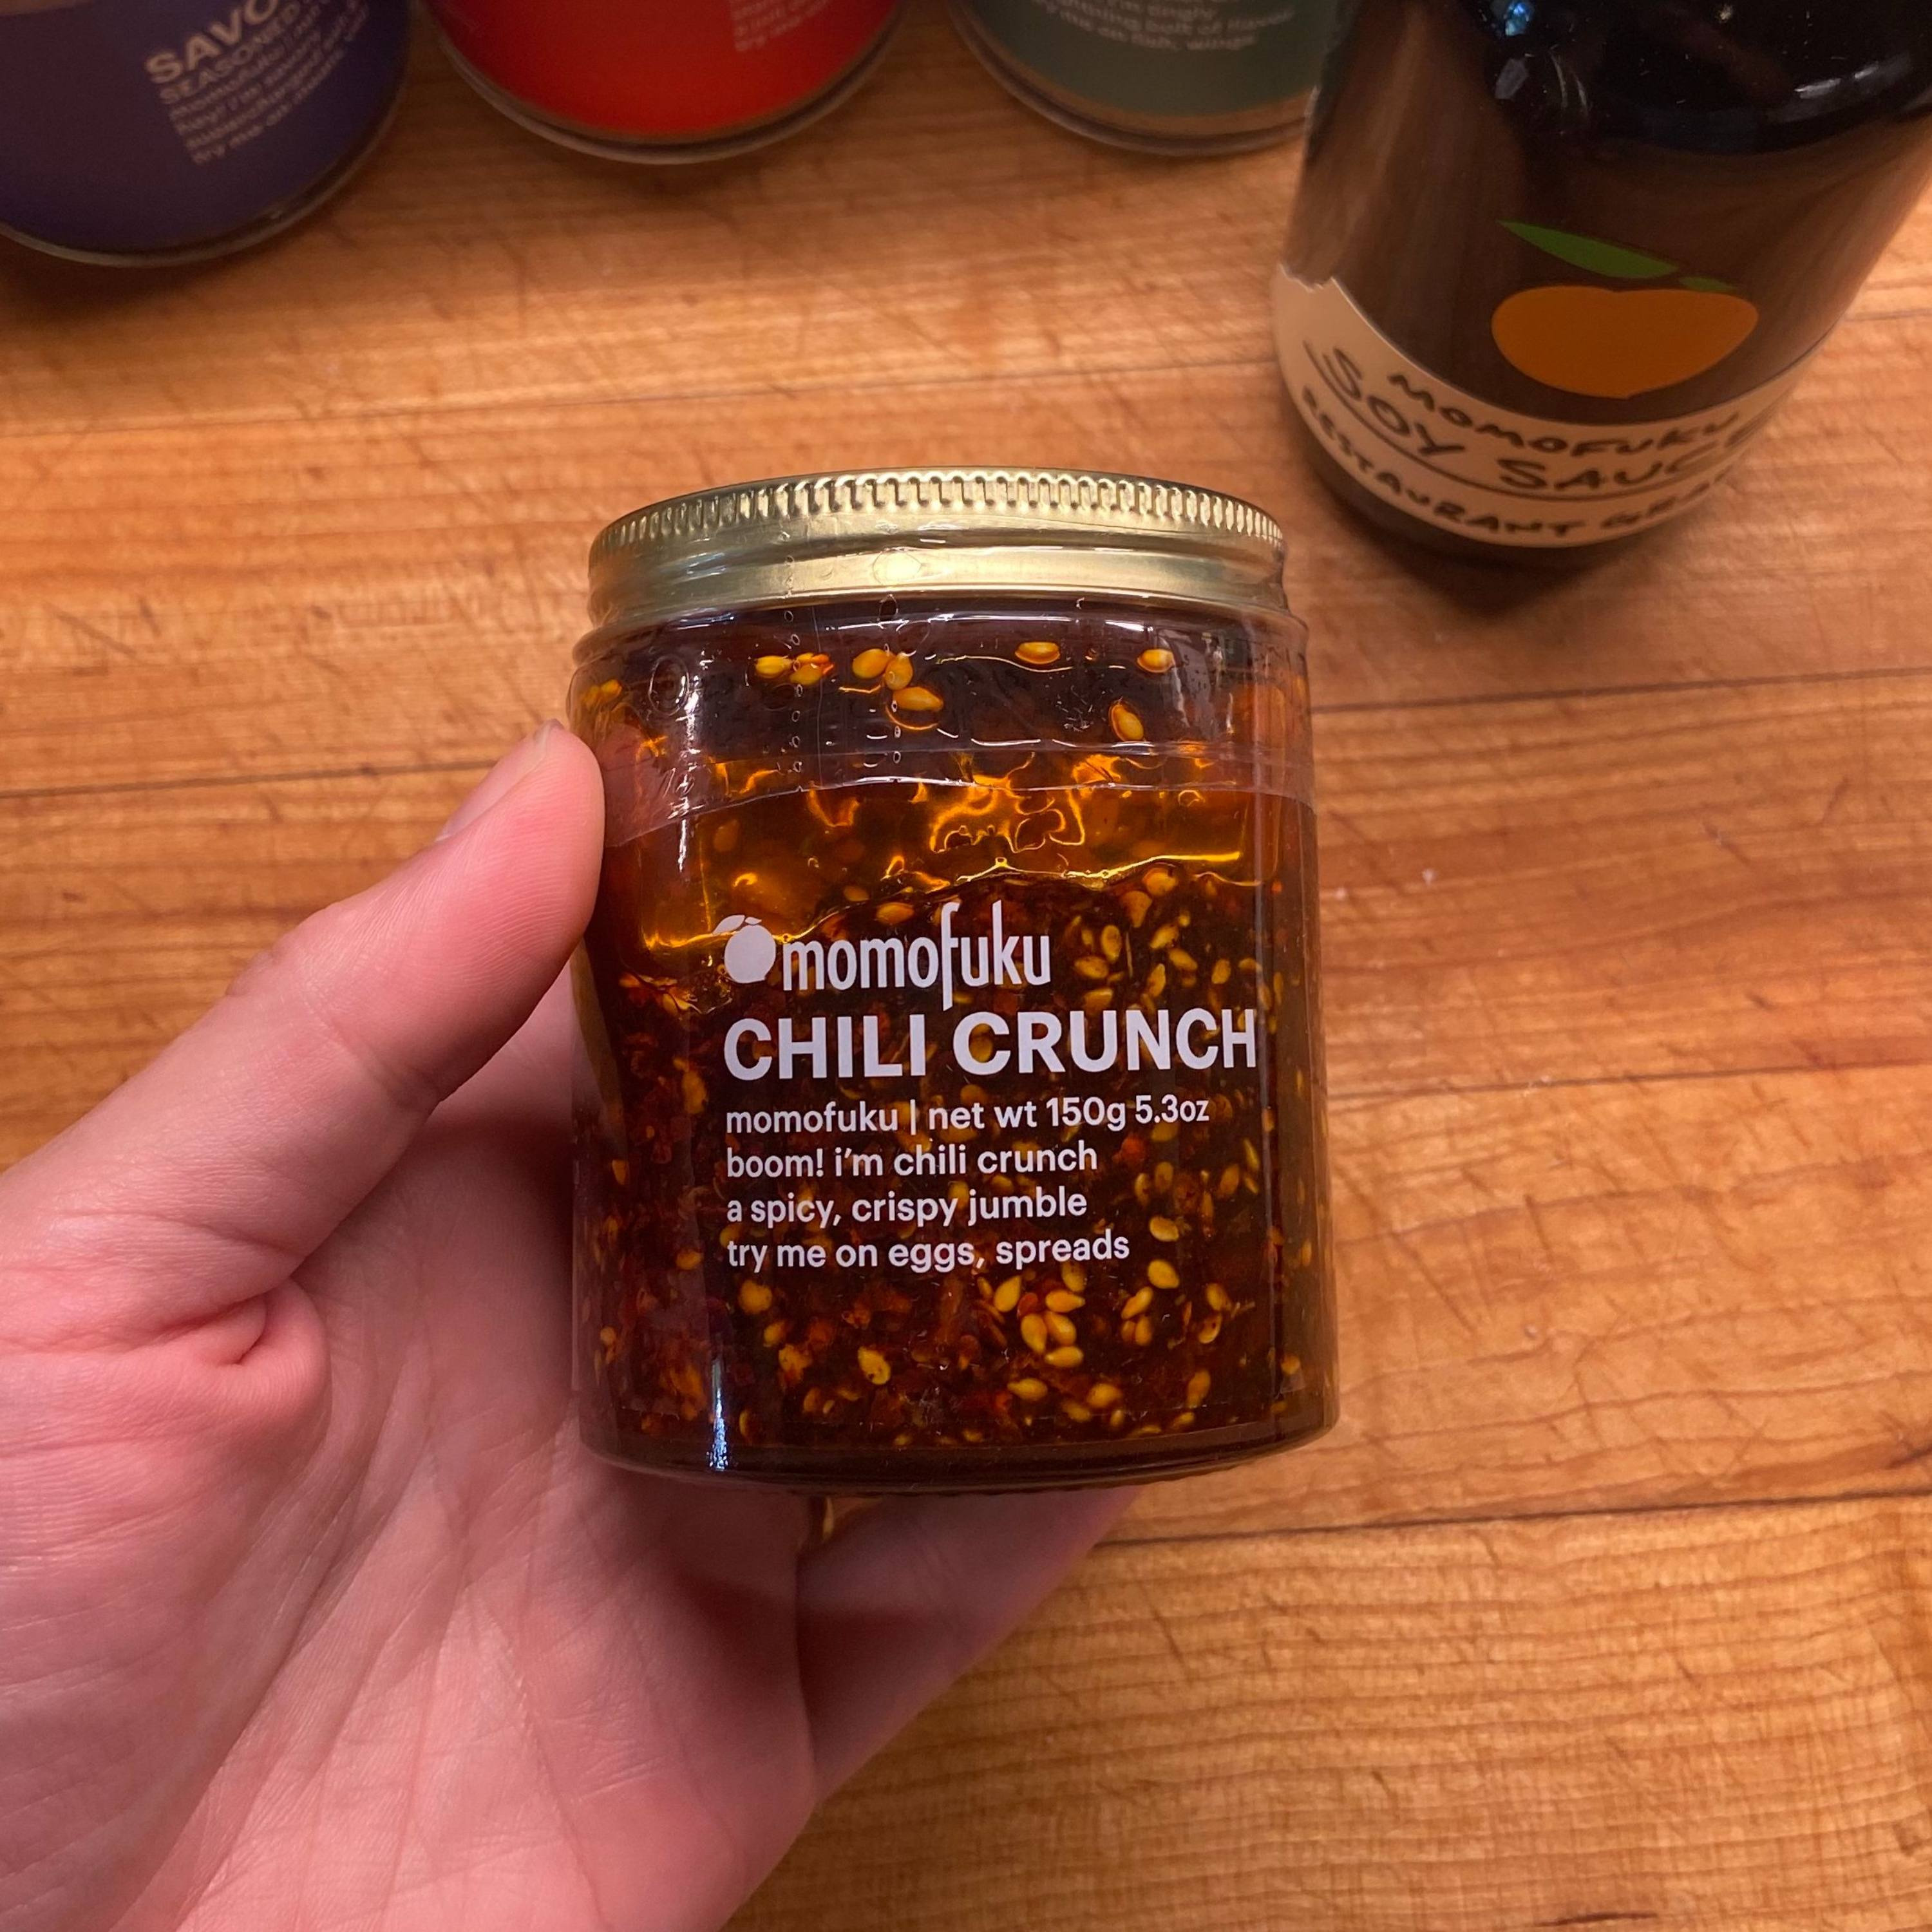 Why Does the Chili Crisp Drama Matter? PREVIEW